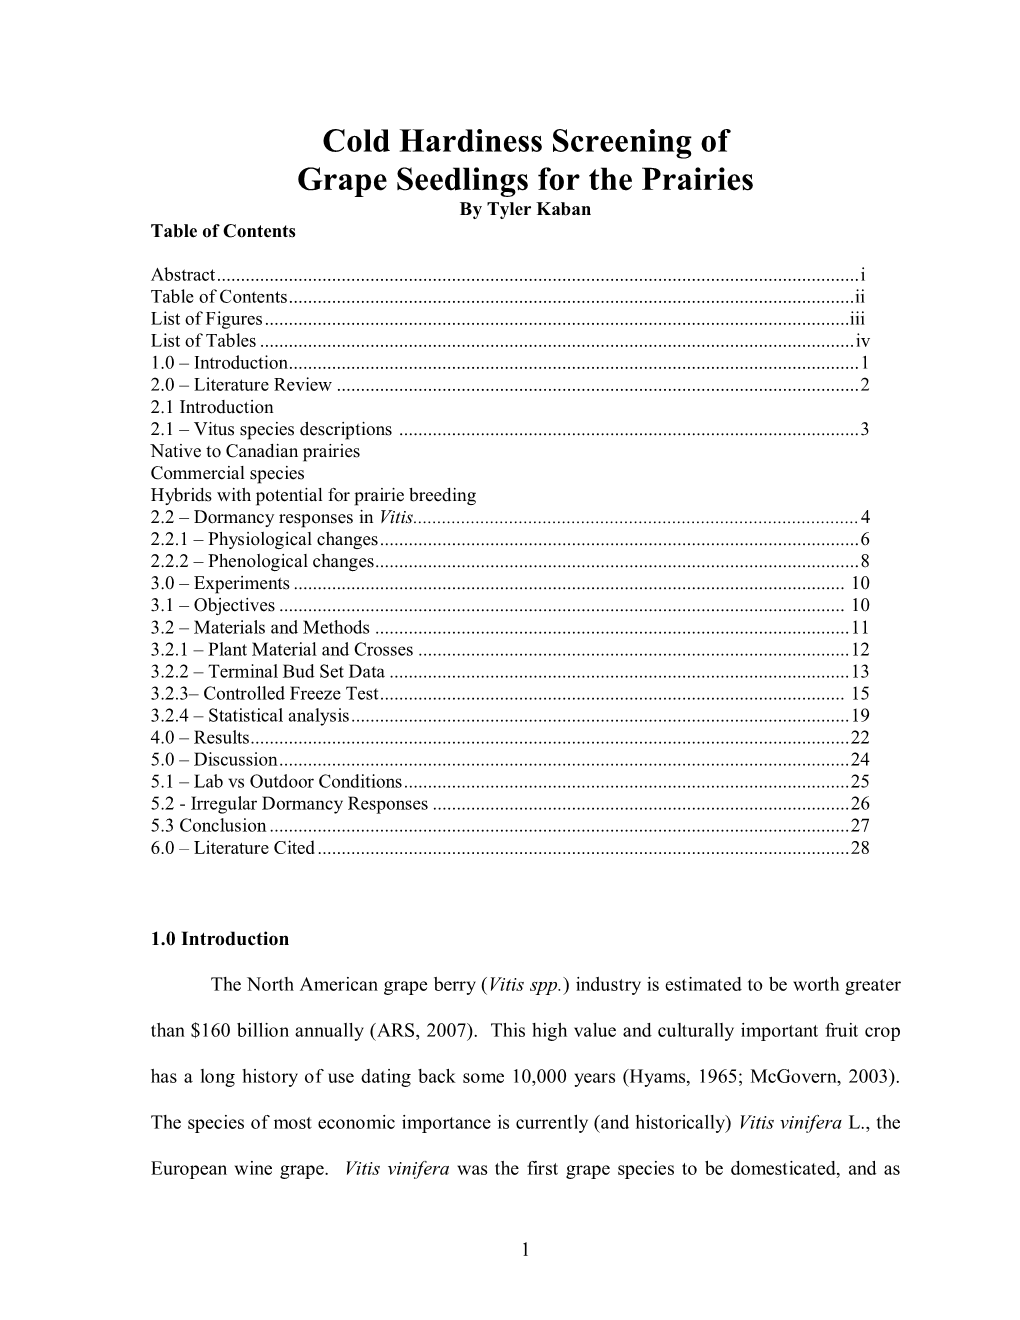 Cold Hardiness Screening of Grape Seedlings for the Prairies by Tyler Kaban Table of Contents